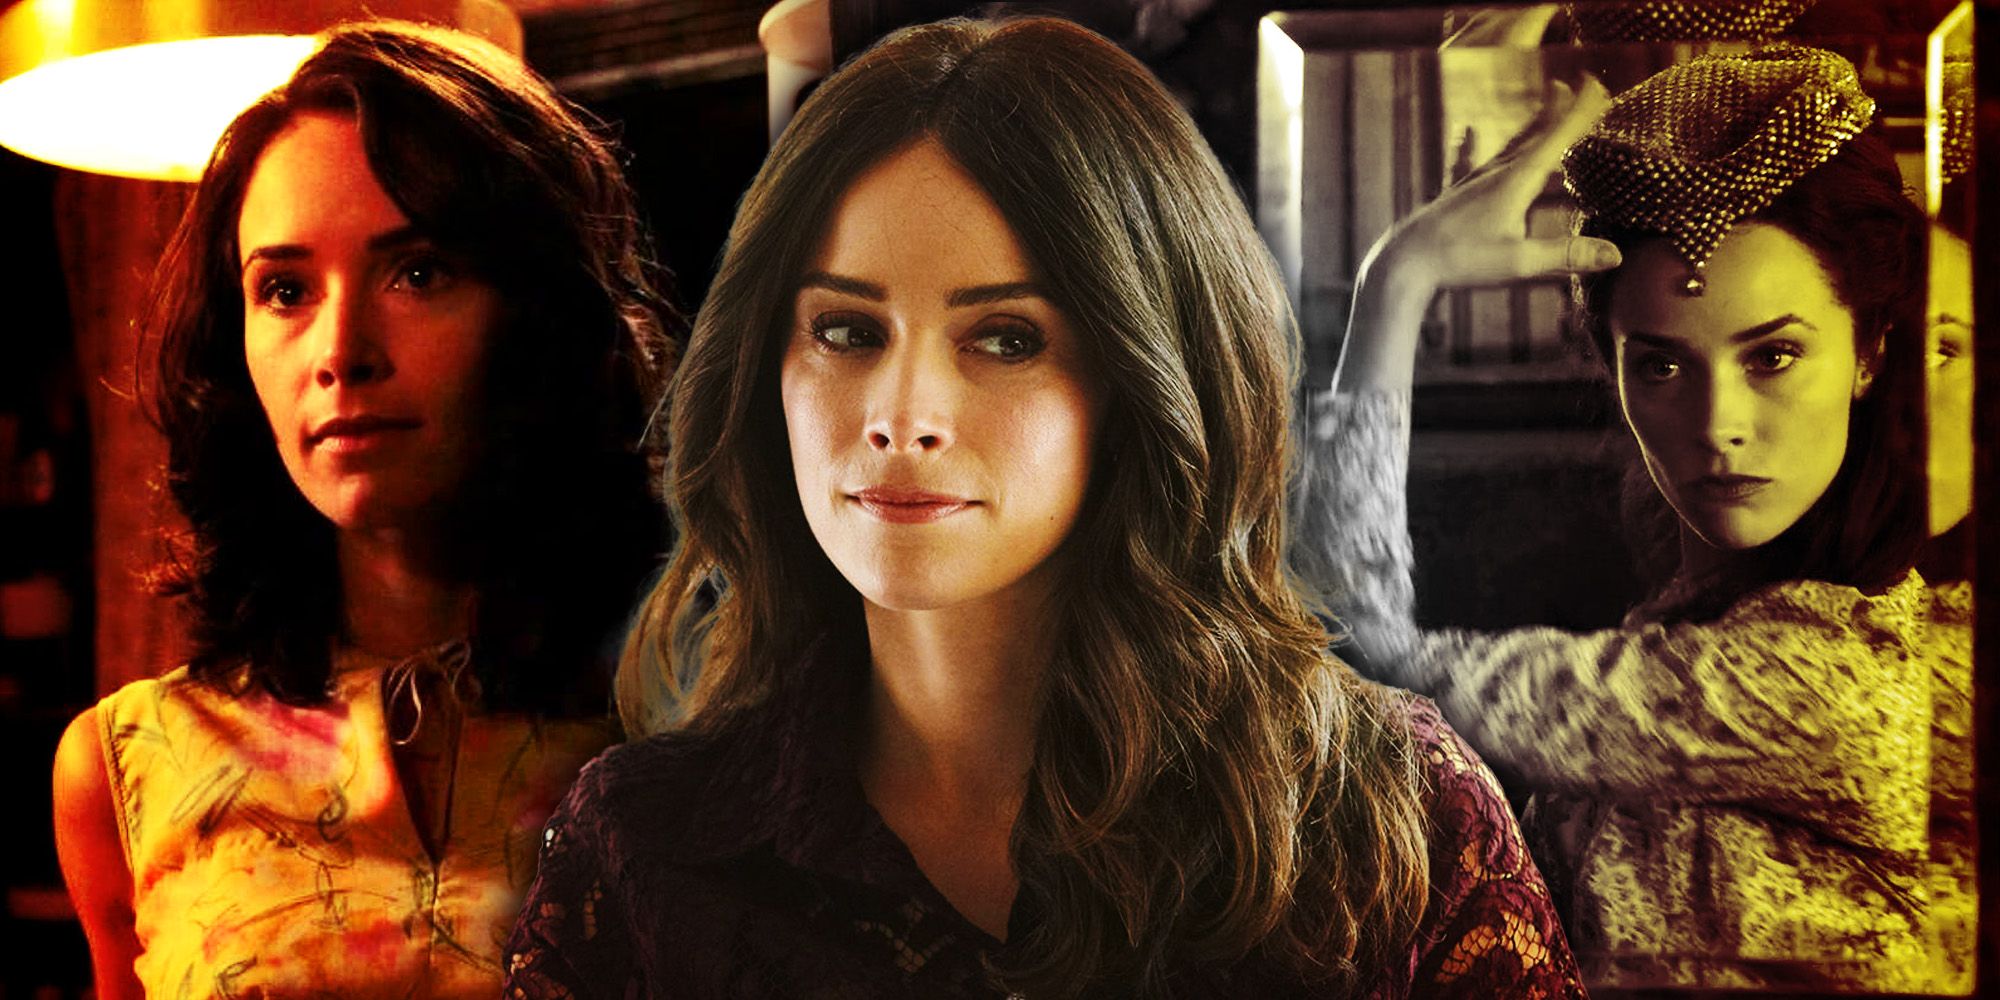 Abigail Spencer in Mad Men, Suits, and Oz the Great and Powerful